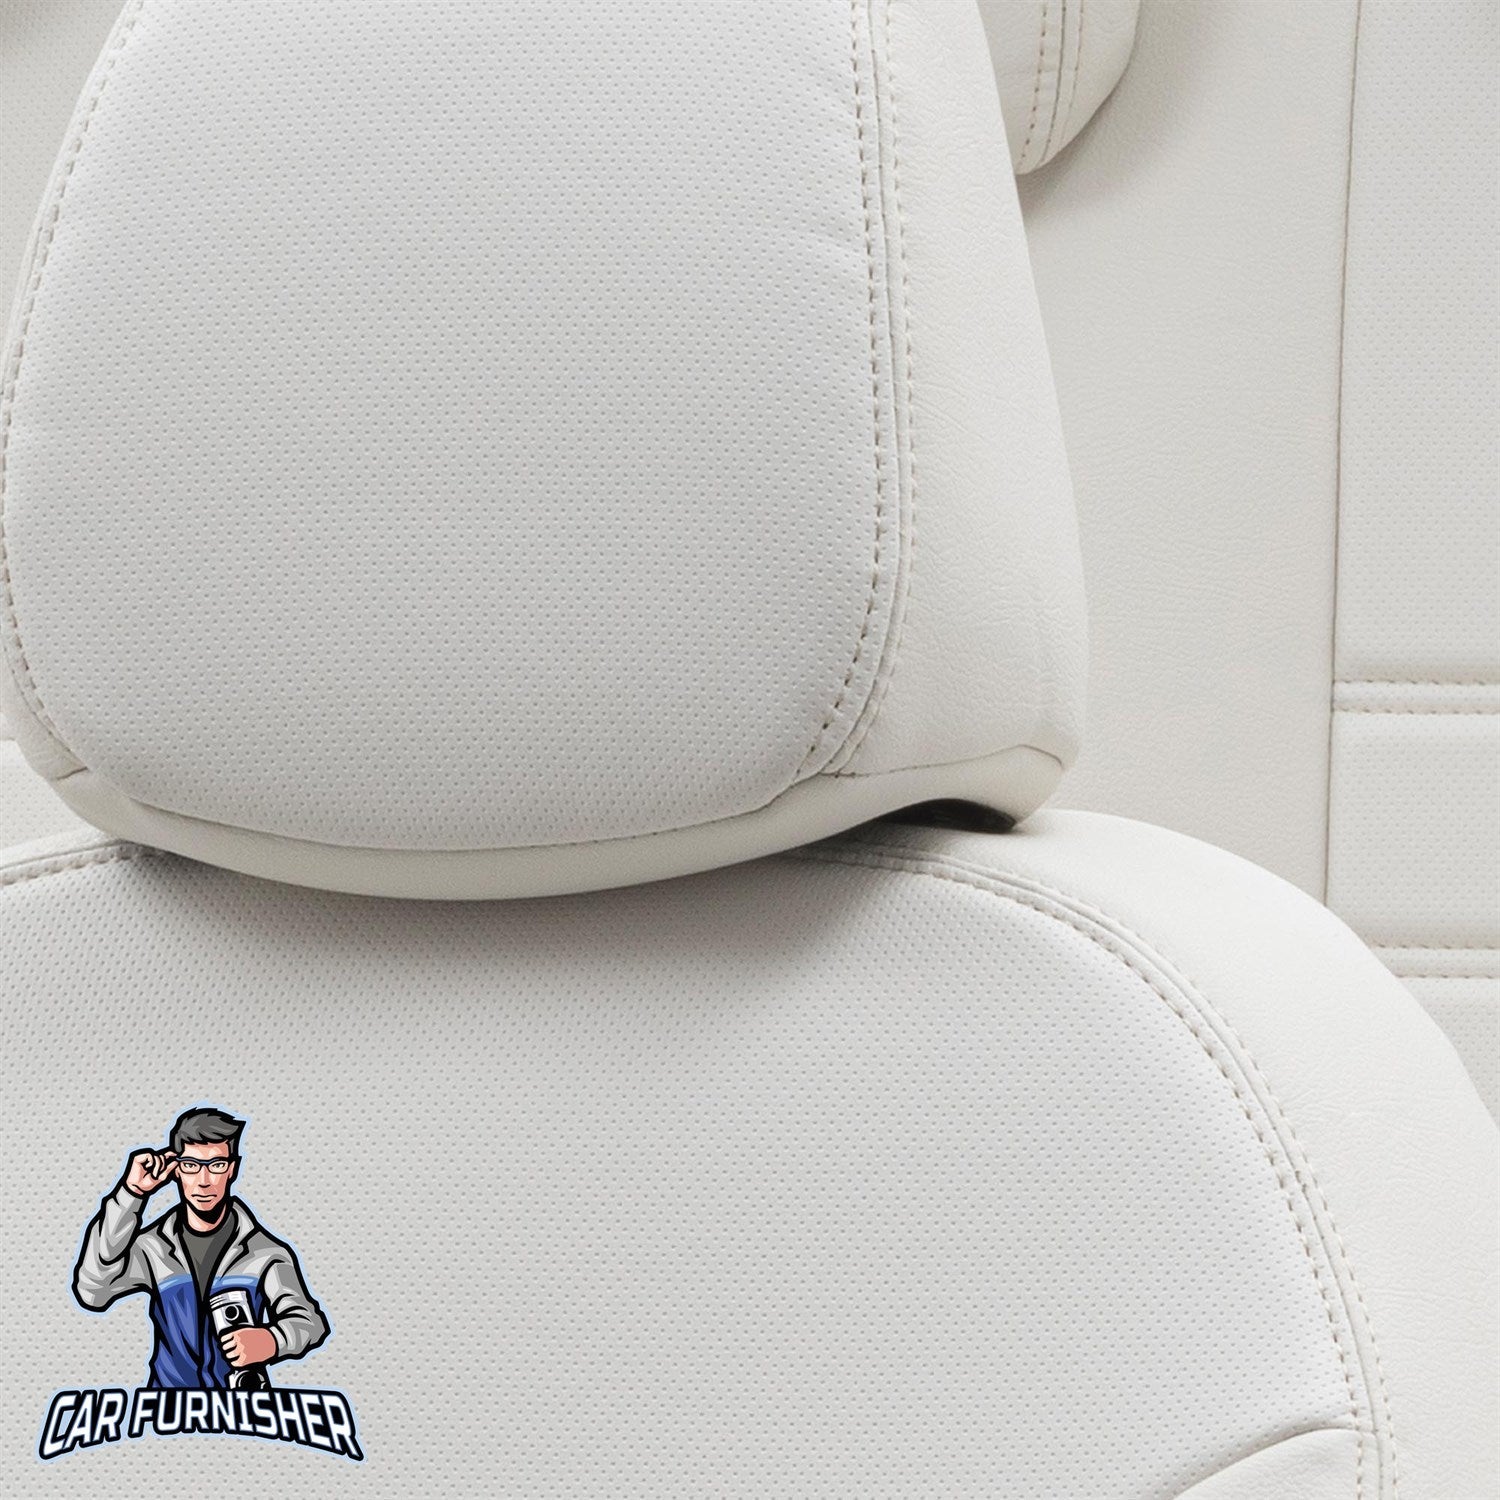 Nissan Note Seat Covers Istanbul Leather Design Ivory Leather